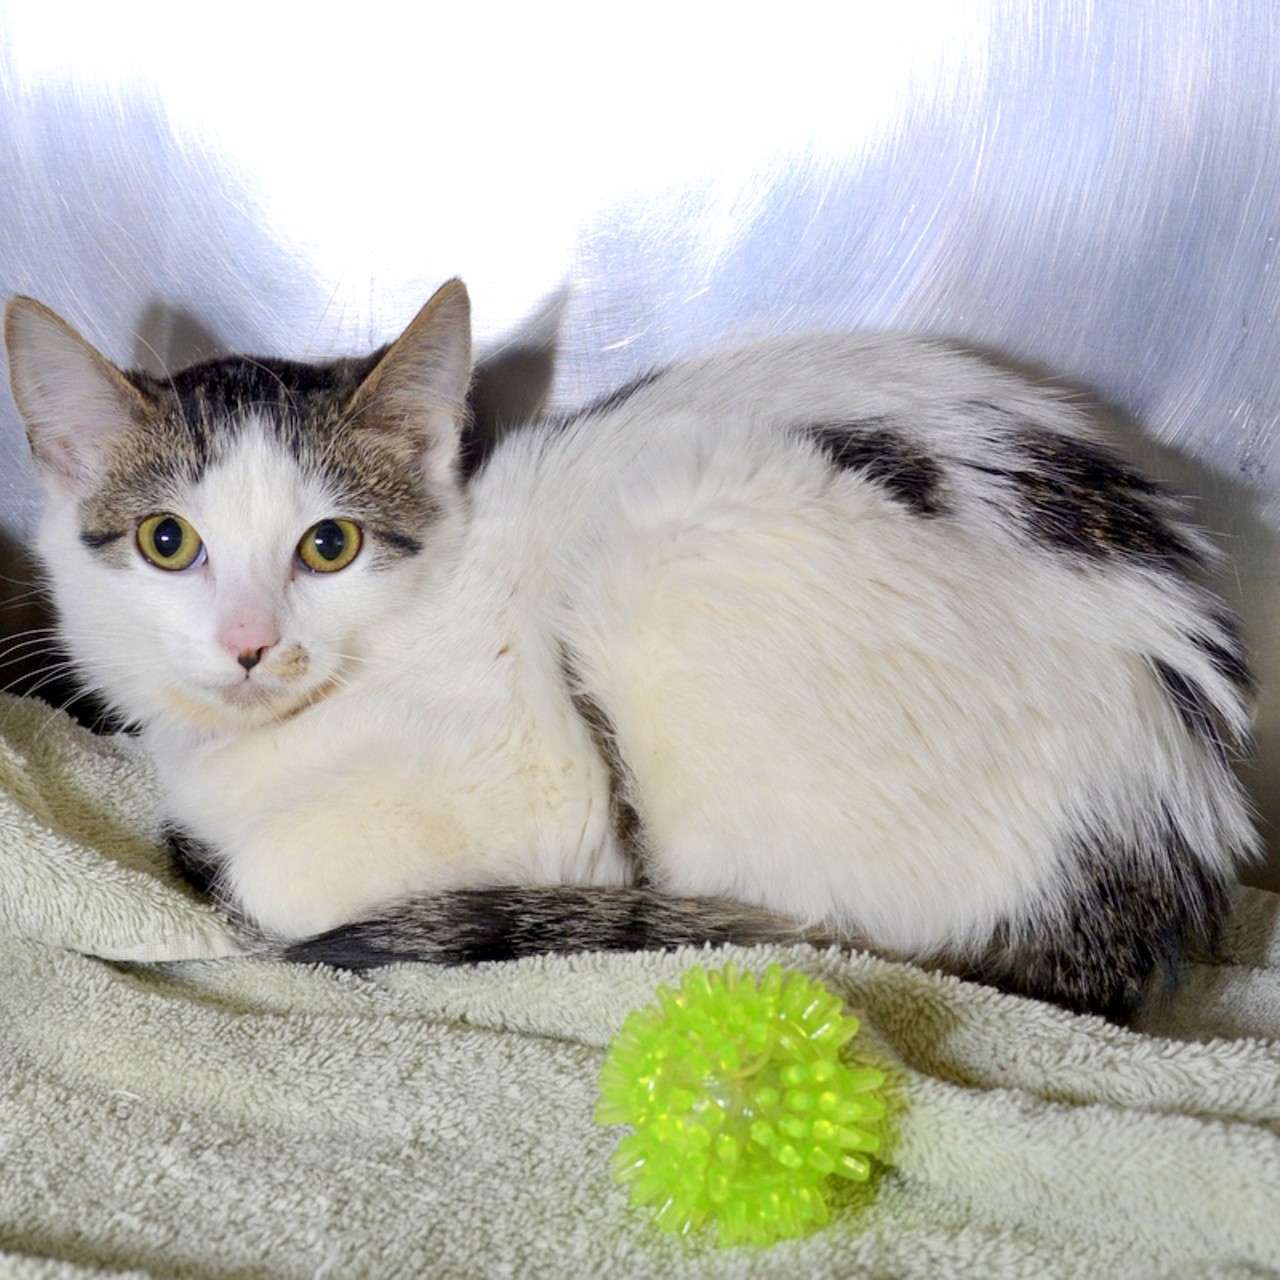 NAME: Dot
GENDER: Female
BREED: Domestic Short Hair
AGE: 4 months
WEIGHT: 4 pounds
SPECIAL CONSIDERATIONS: This is a &#147;hard-working,&#148; or barn cat
REASON I CAME TO MHS: Owner surrender
LOCATION: Berman Center for Animal Care in Westland
ID NUMBER: 862438